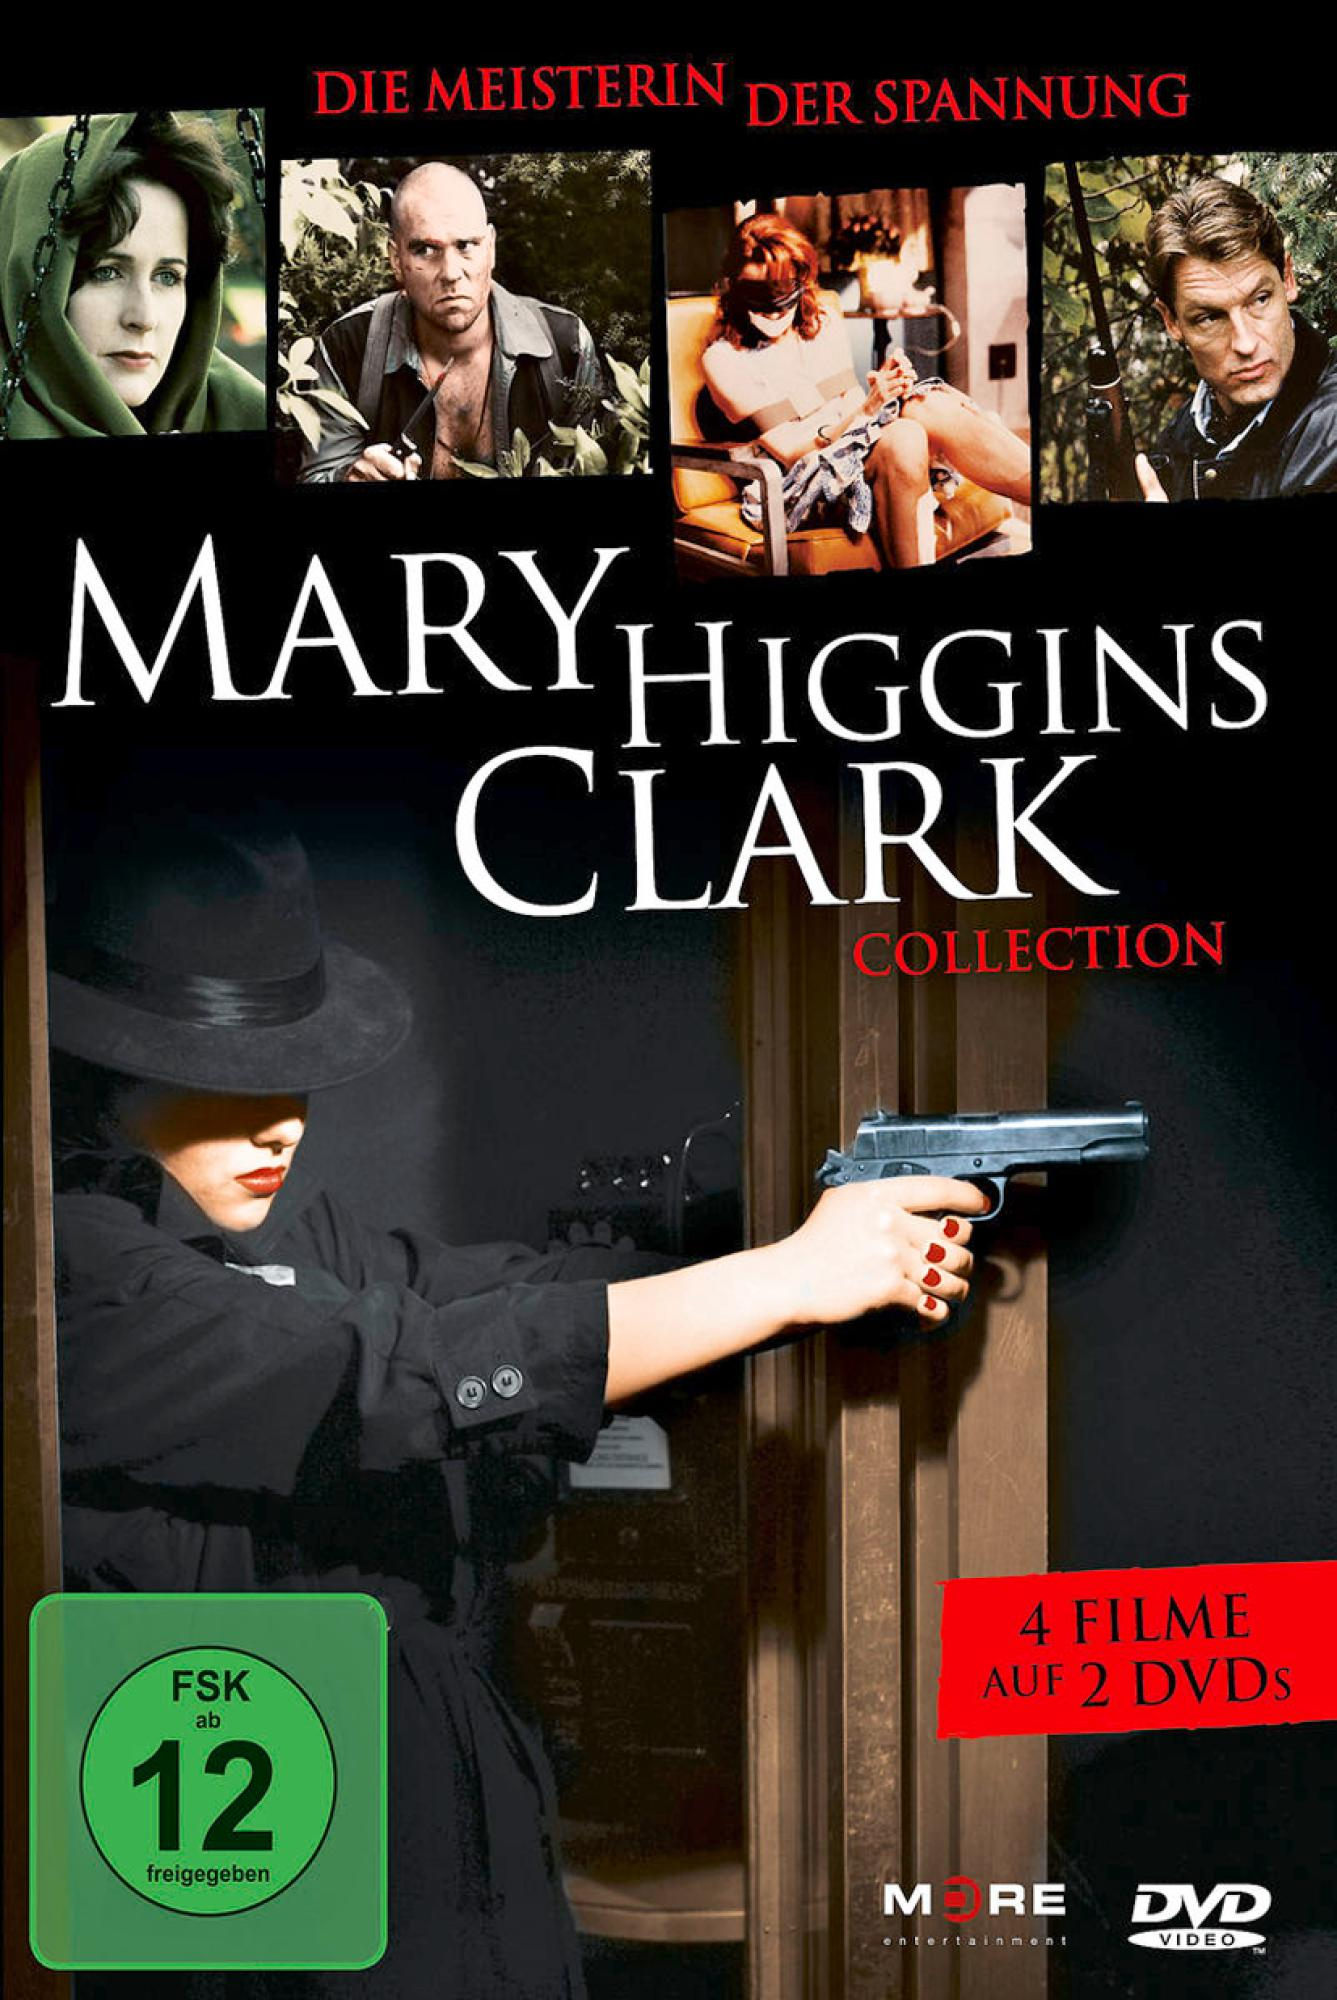 Mary DVD (4 Higgins Filme) Clark Collection